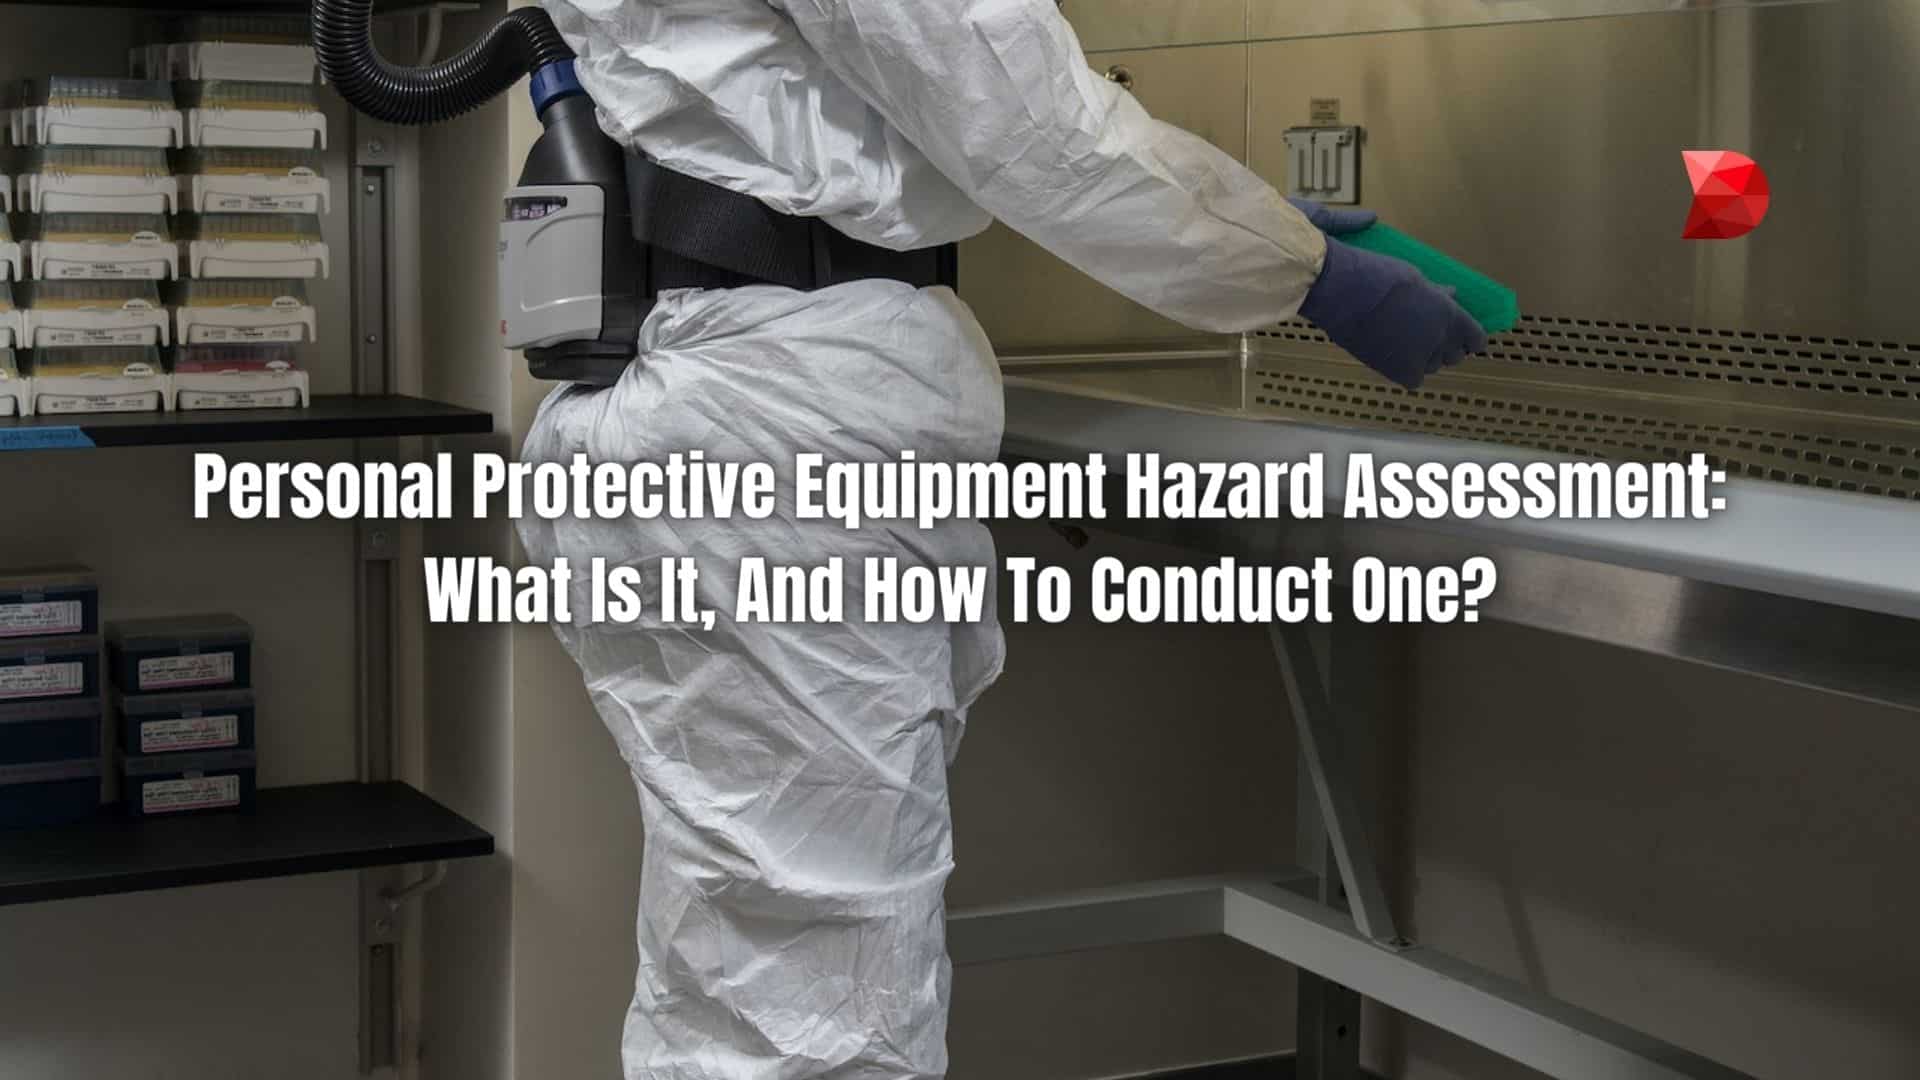 Personal Protective Equipment Hazard Assessment What Is It, And How To Conduct One